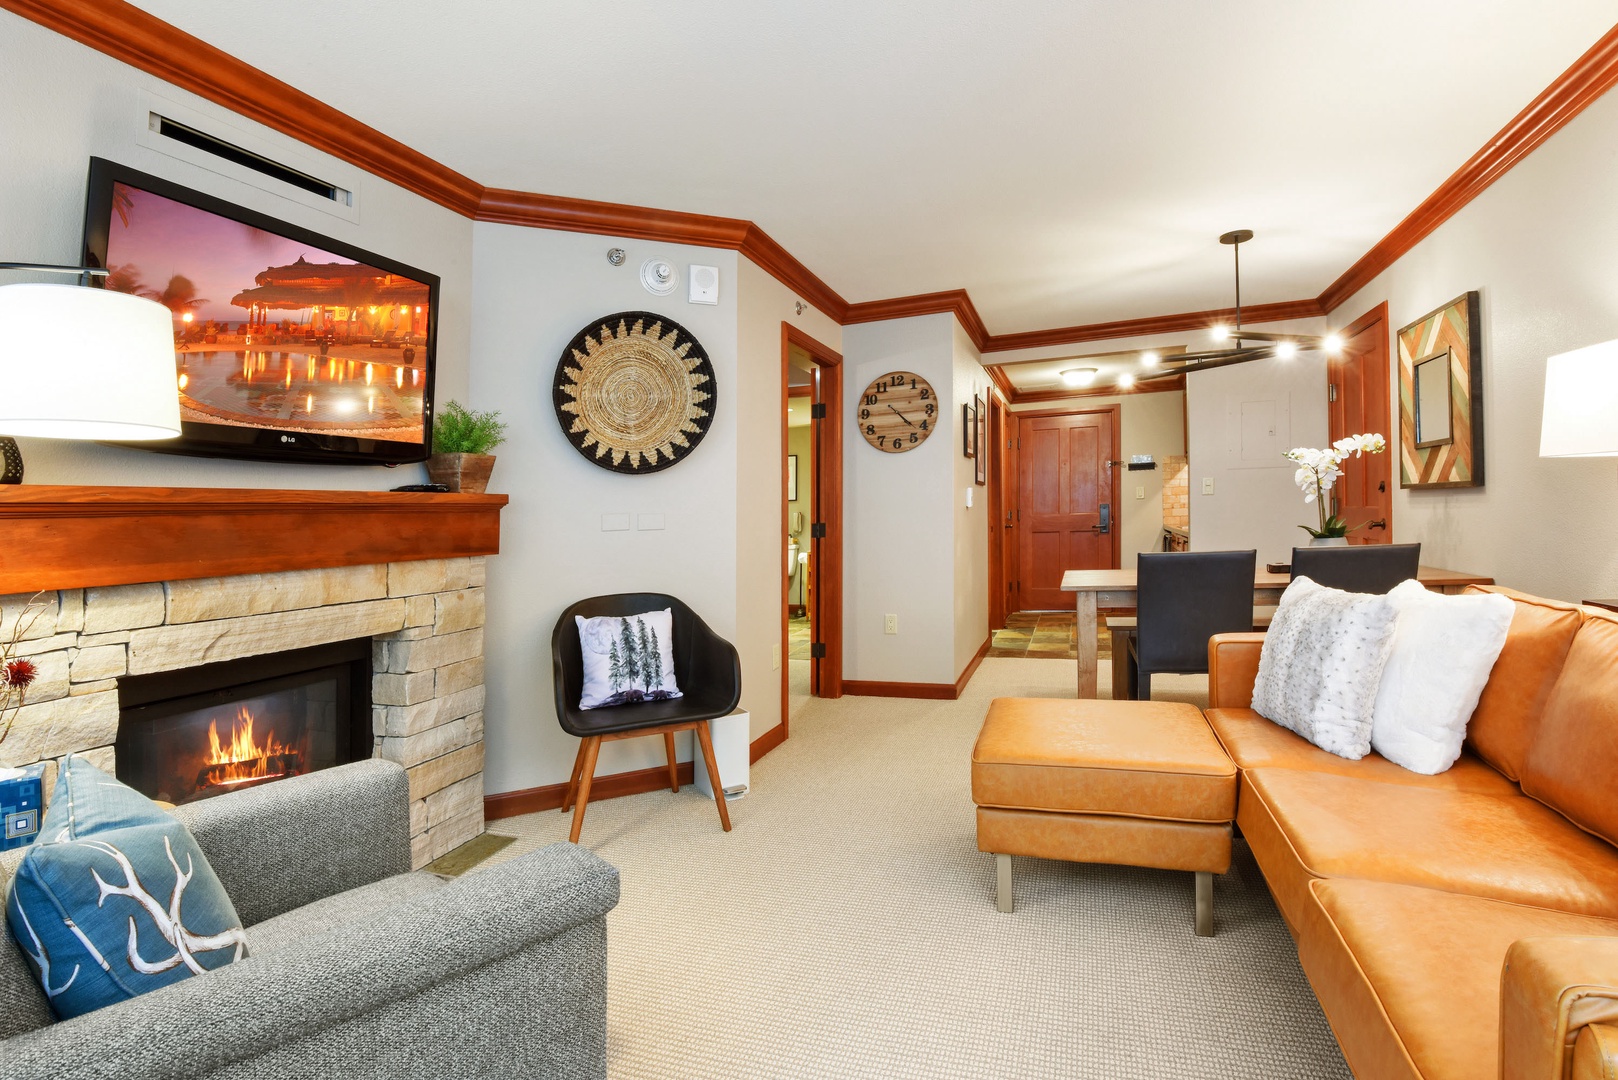 Newly remodeled hotel style living room with fireplace, TV